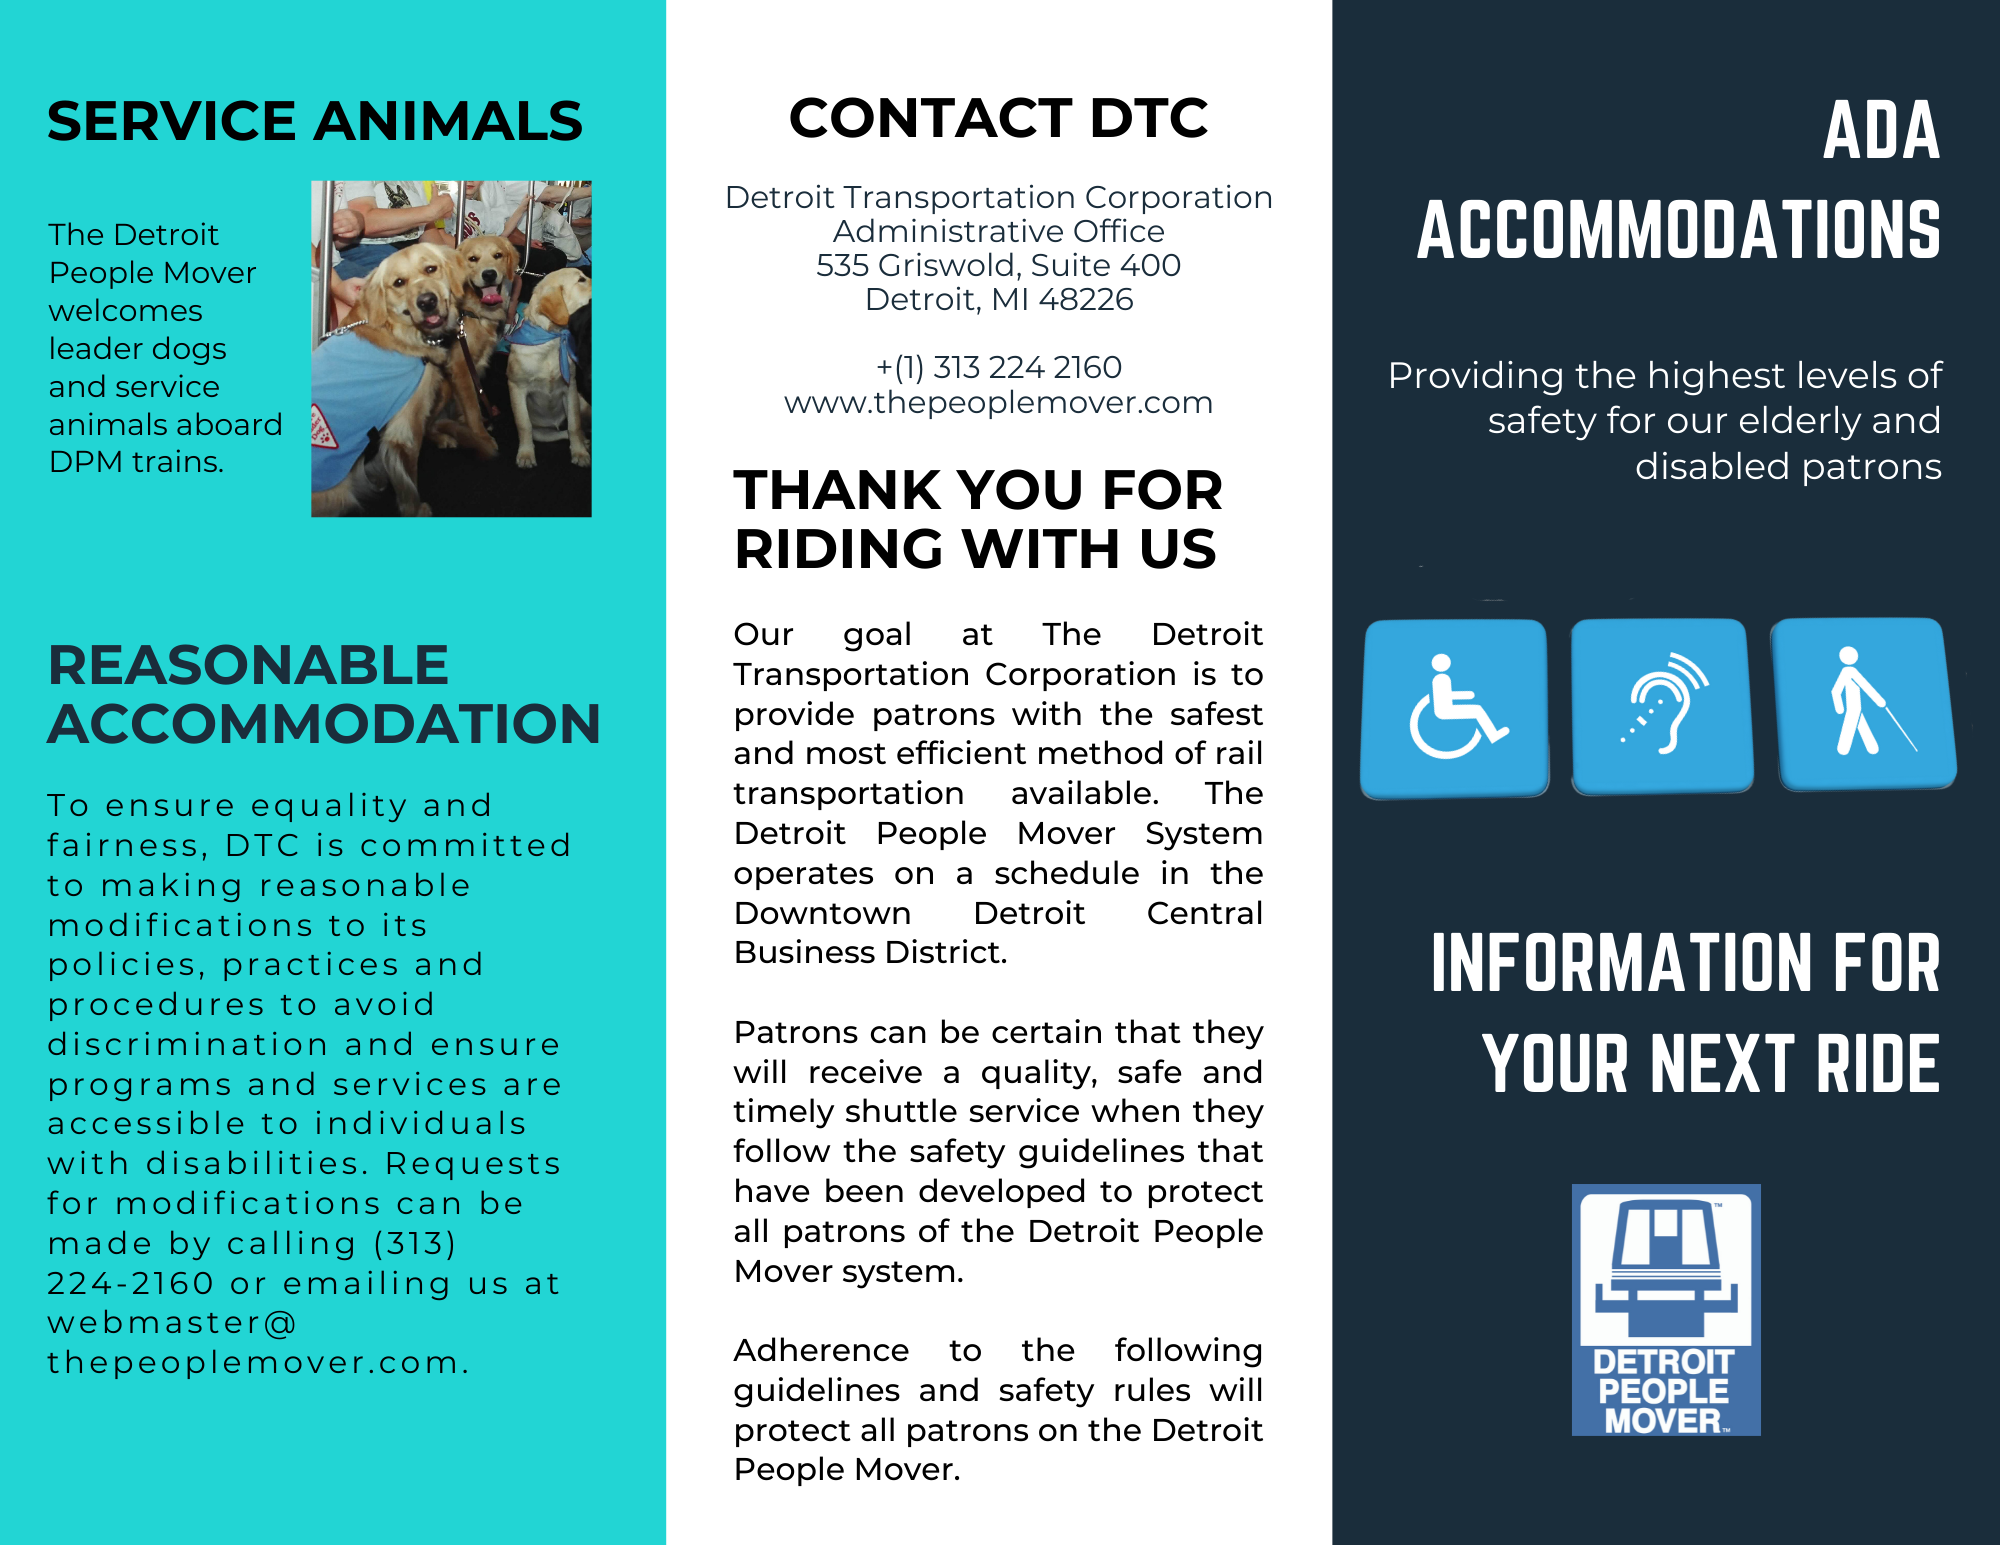 The People Mover provides reasonable modification and ADA accessibility to its patrons. To receive more information, please call (313) 224-2160 or email us at webmaster@thepeoplemover.com